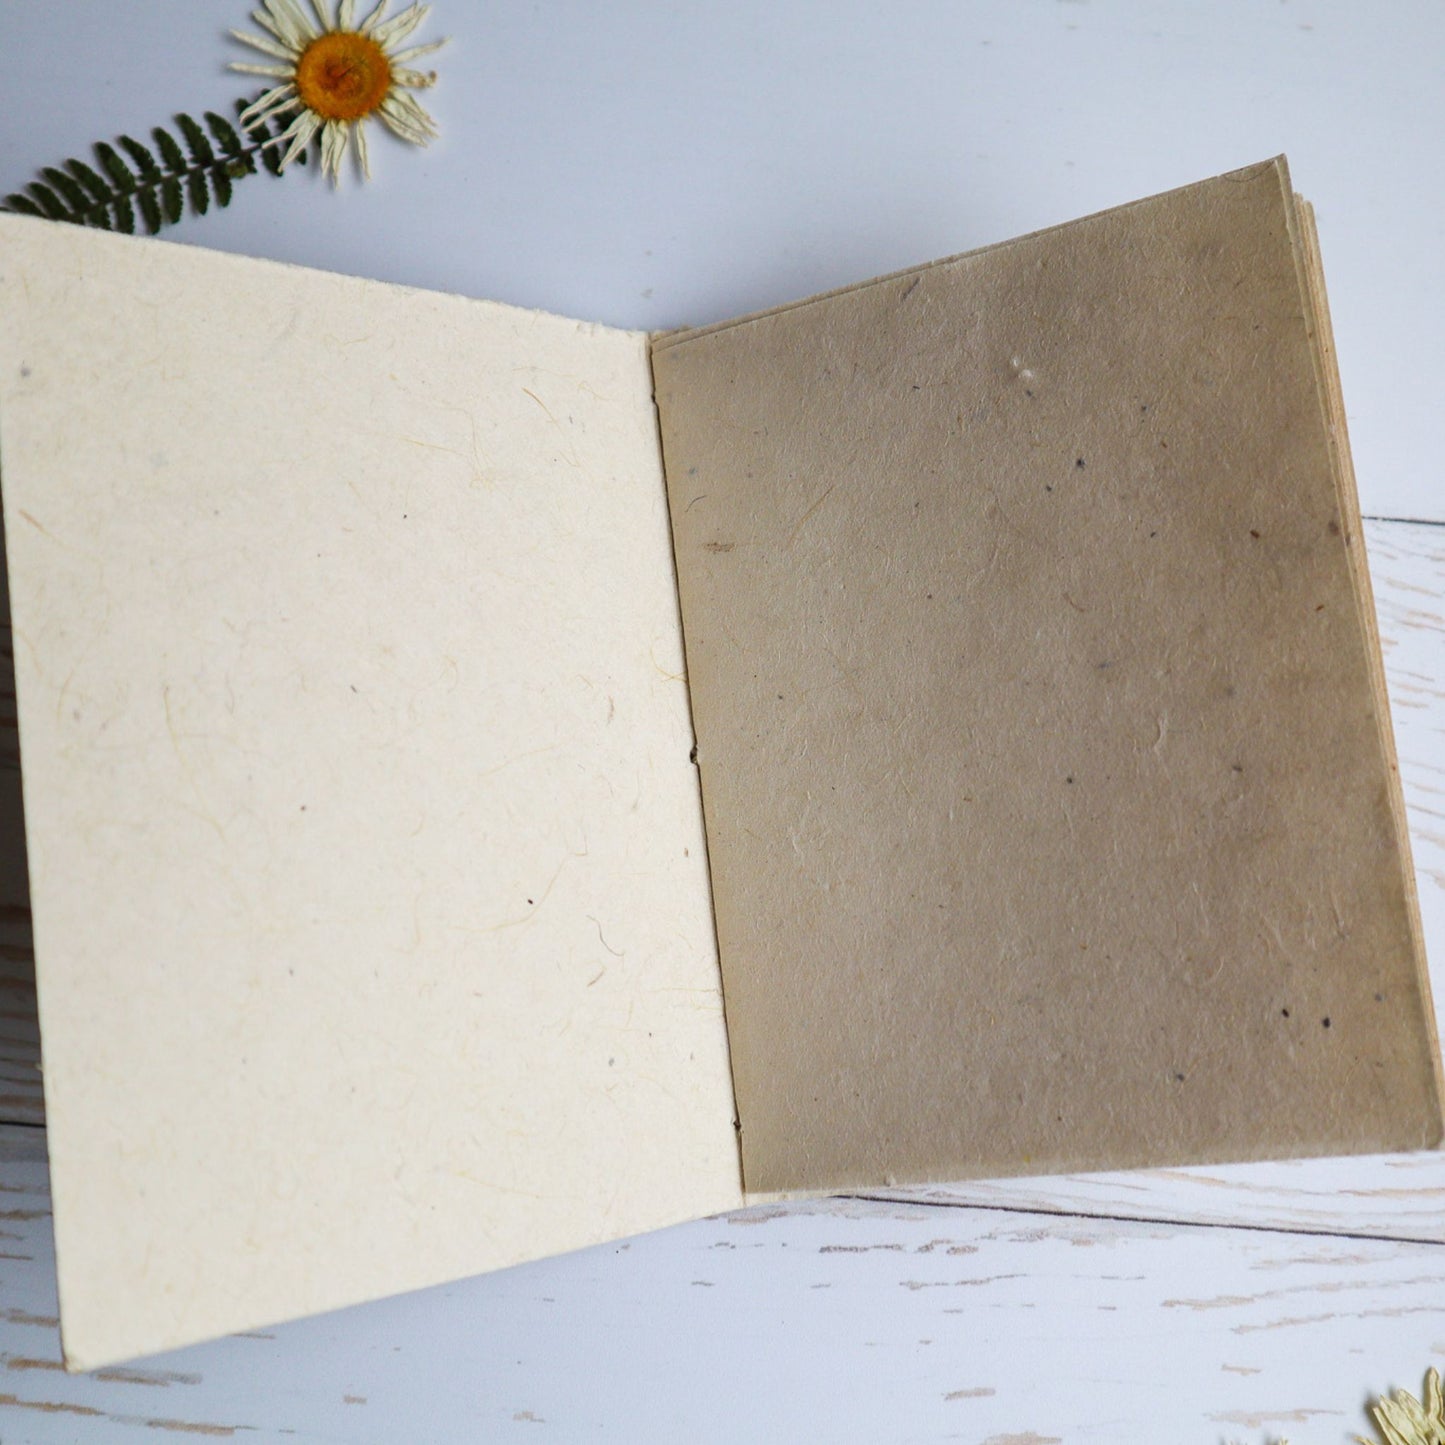 Inside pages of flower seed paper journal by Helen Jeanne Handmade.